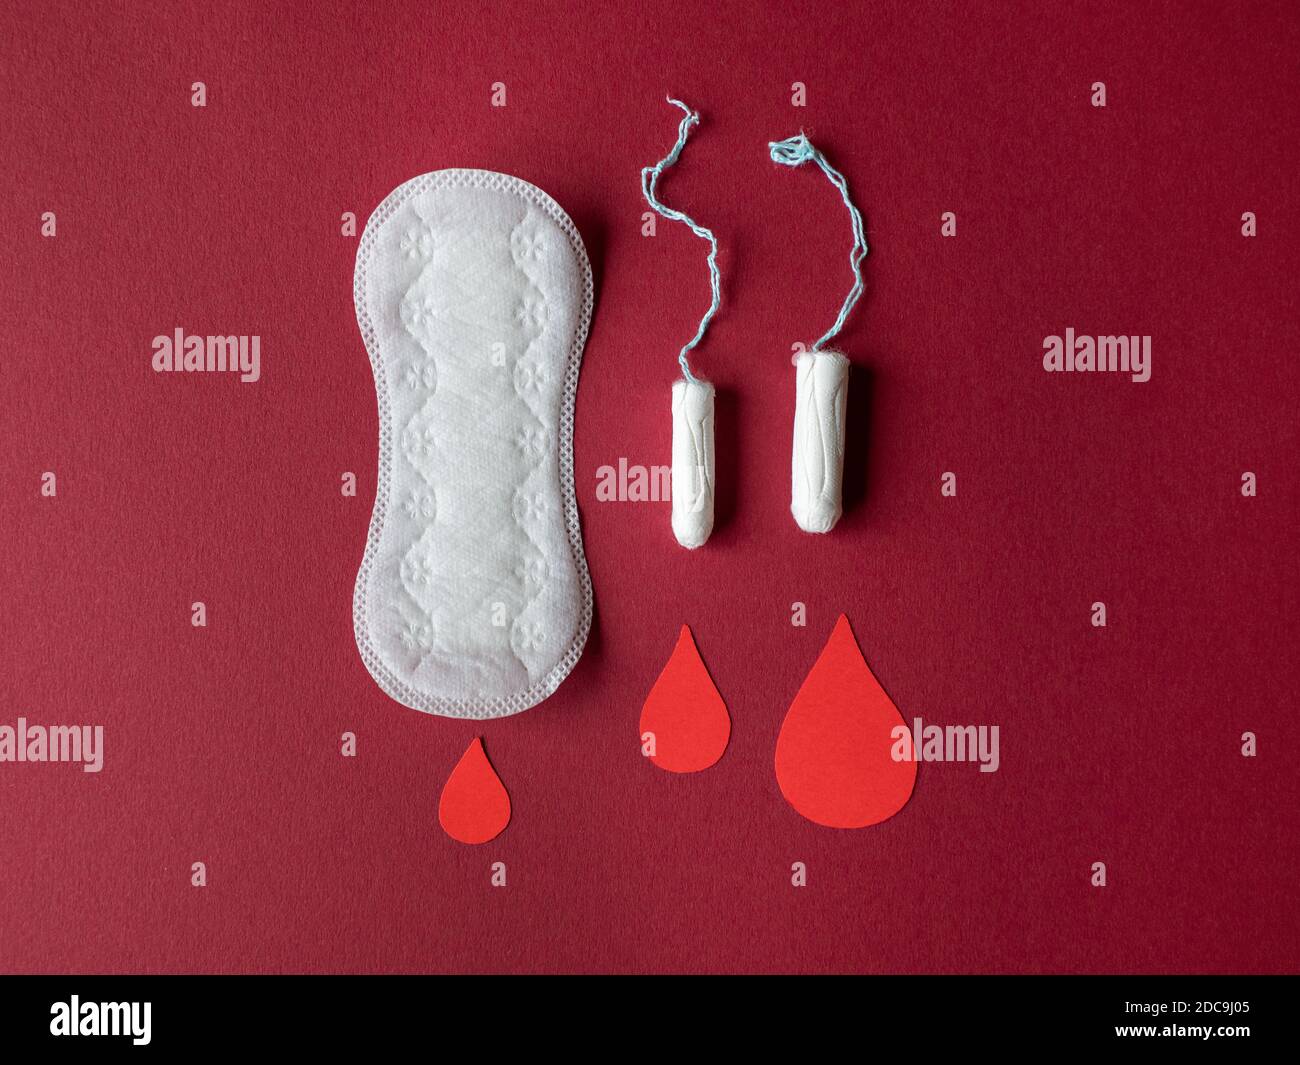 Female menstrual cycle / period products, a tampon and sanitary napkin isolated on red coloured background Stock Photo